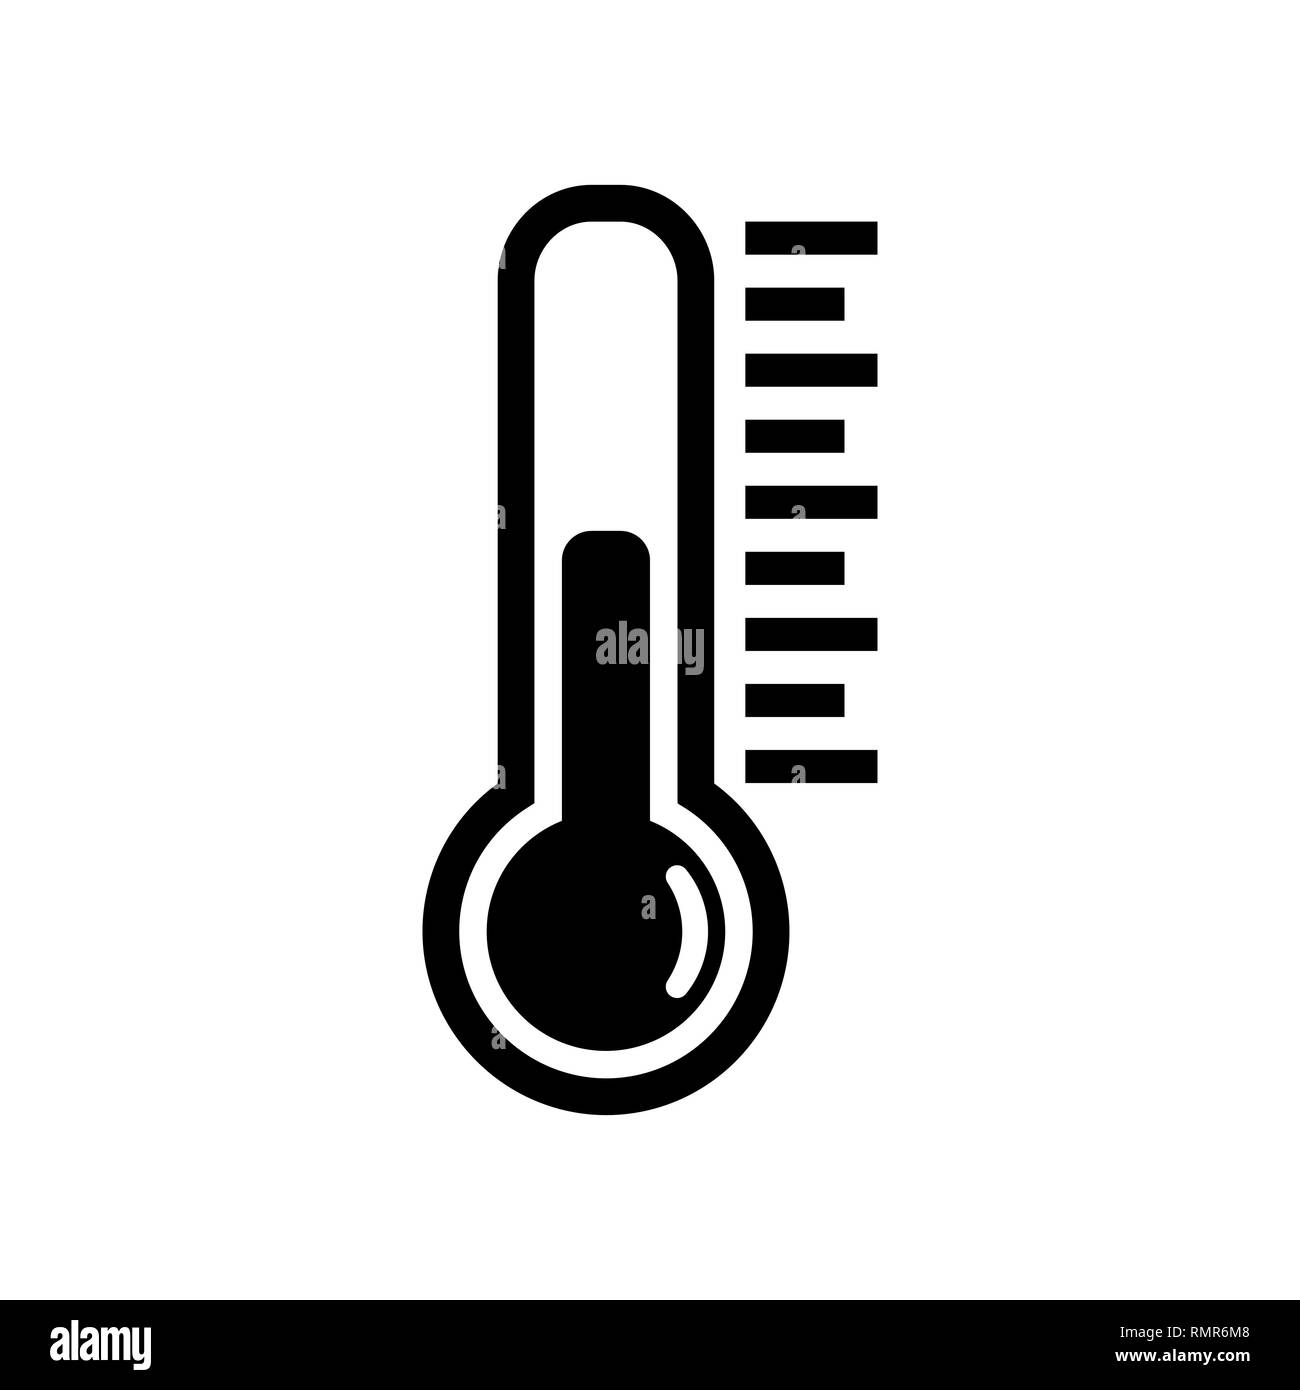 Thermometer icon or temperature symbol, vector and illustration Stock Vector